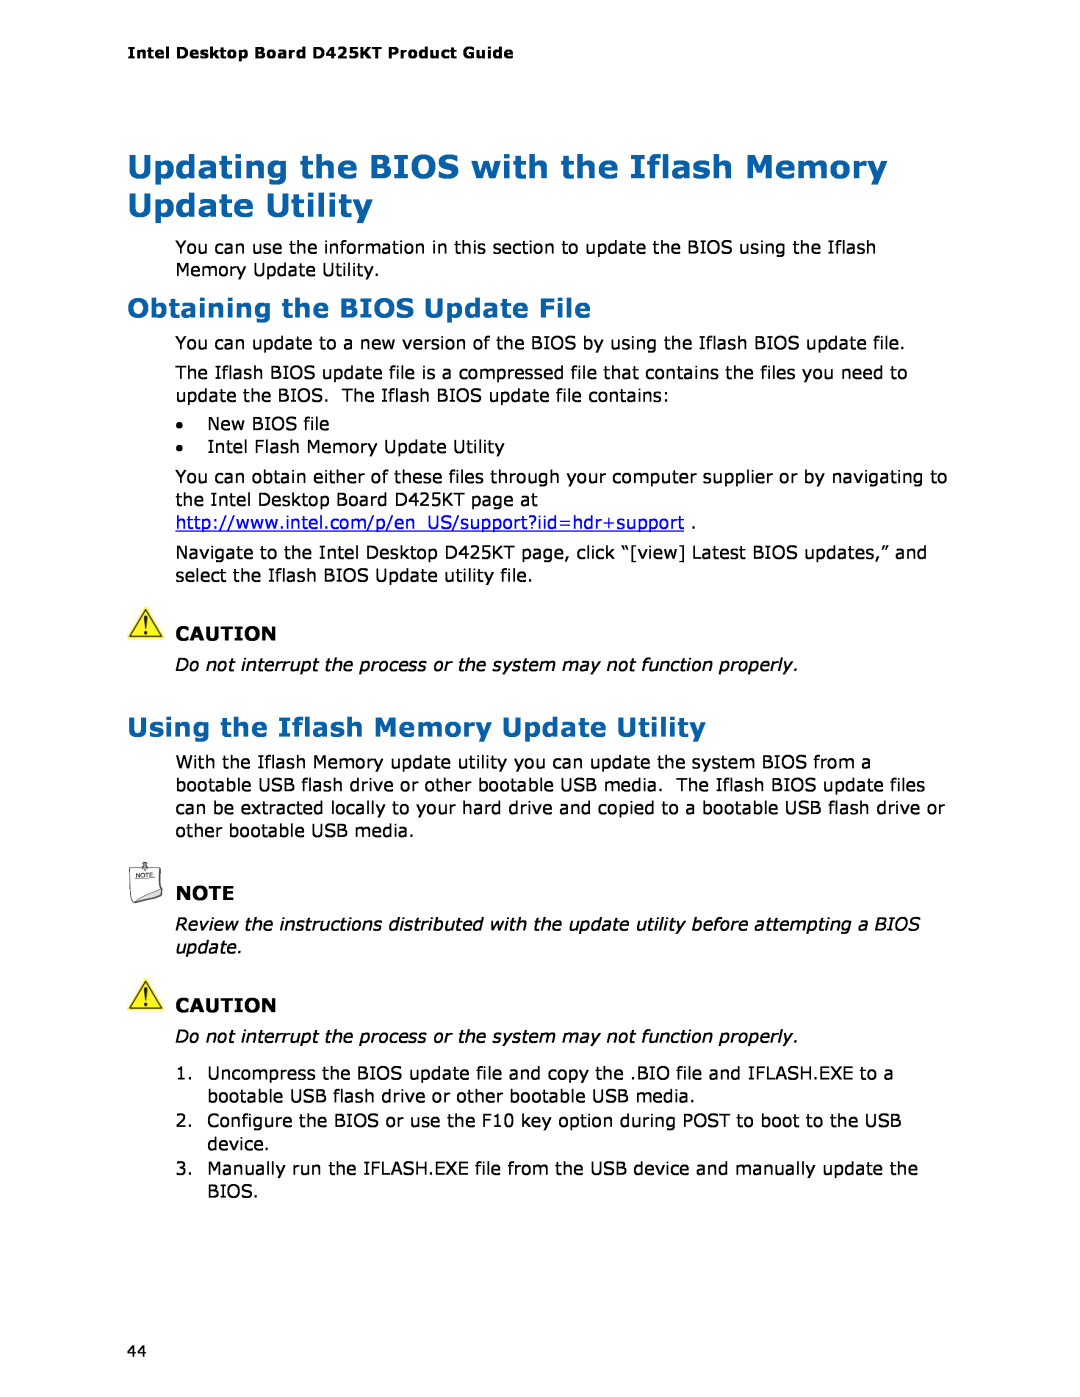 Intel D425KT manual Updating the BIOS with the Iflash Memory Update Utility, Obtaining the BIOS Update File 